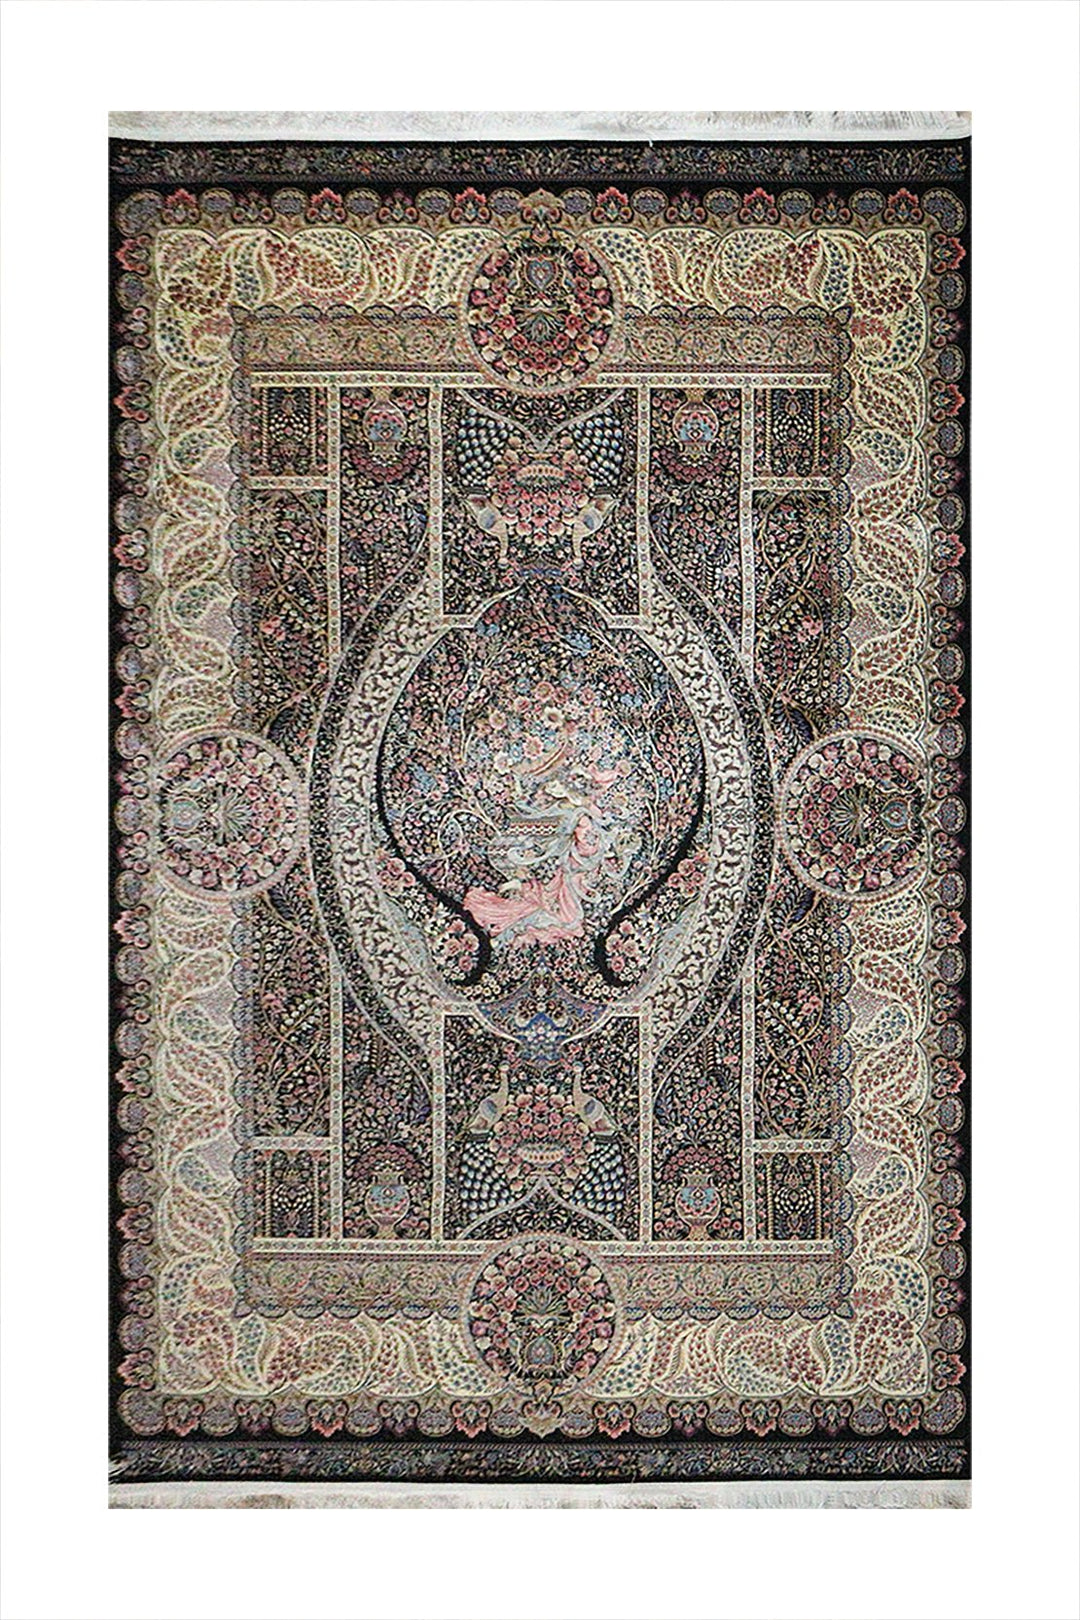 Iranian Premium Quality Silk 1500 Rug - 6.5 x 9.8 FT - Black - Resilient Construction for Long-Lasting Use - V Surfaces